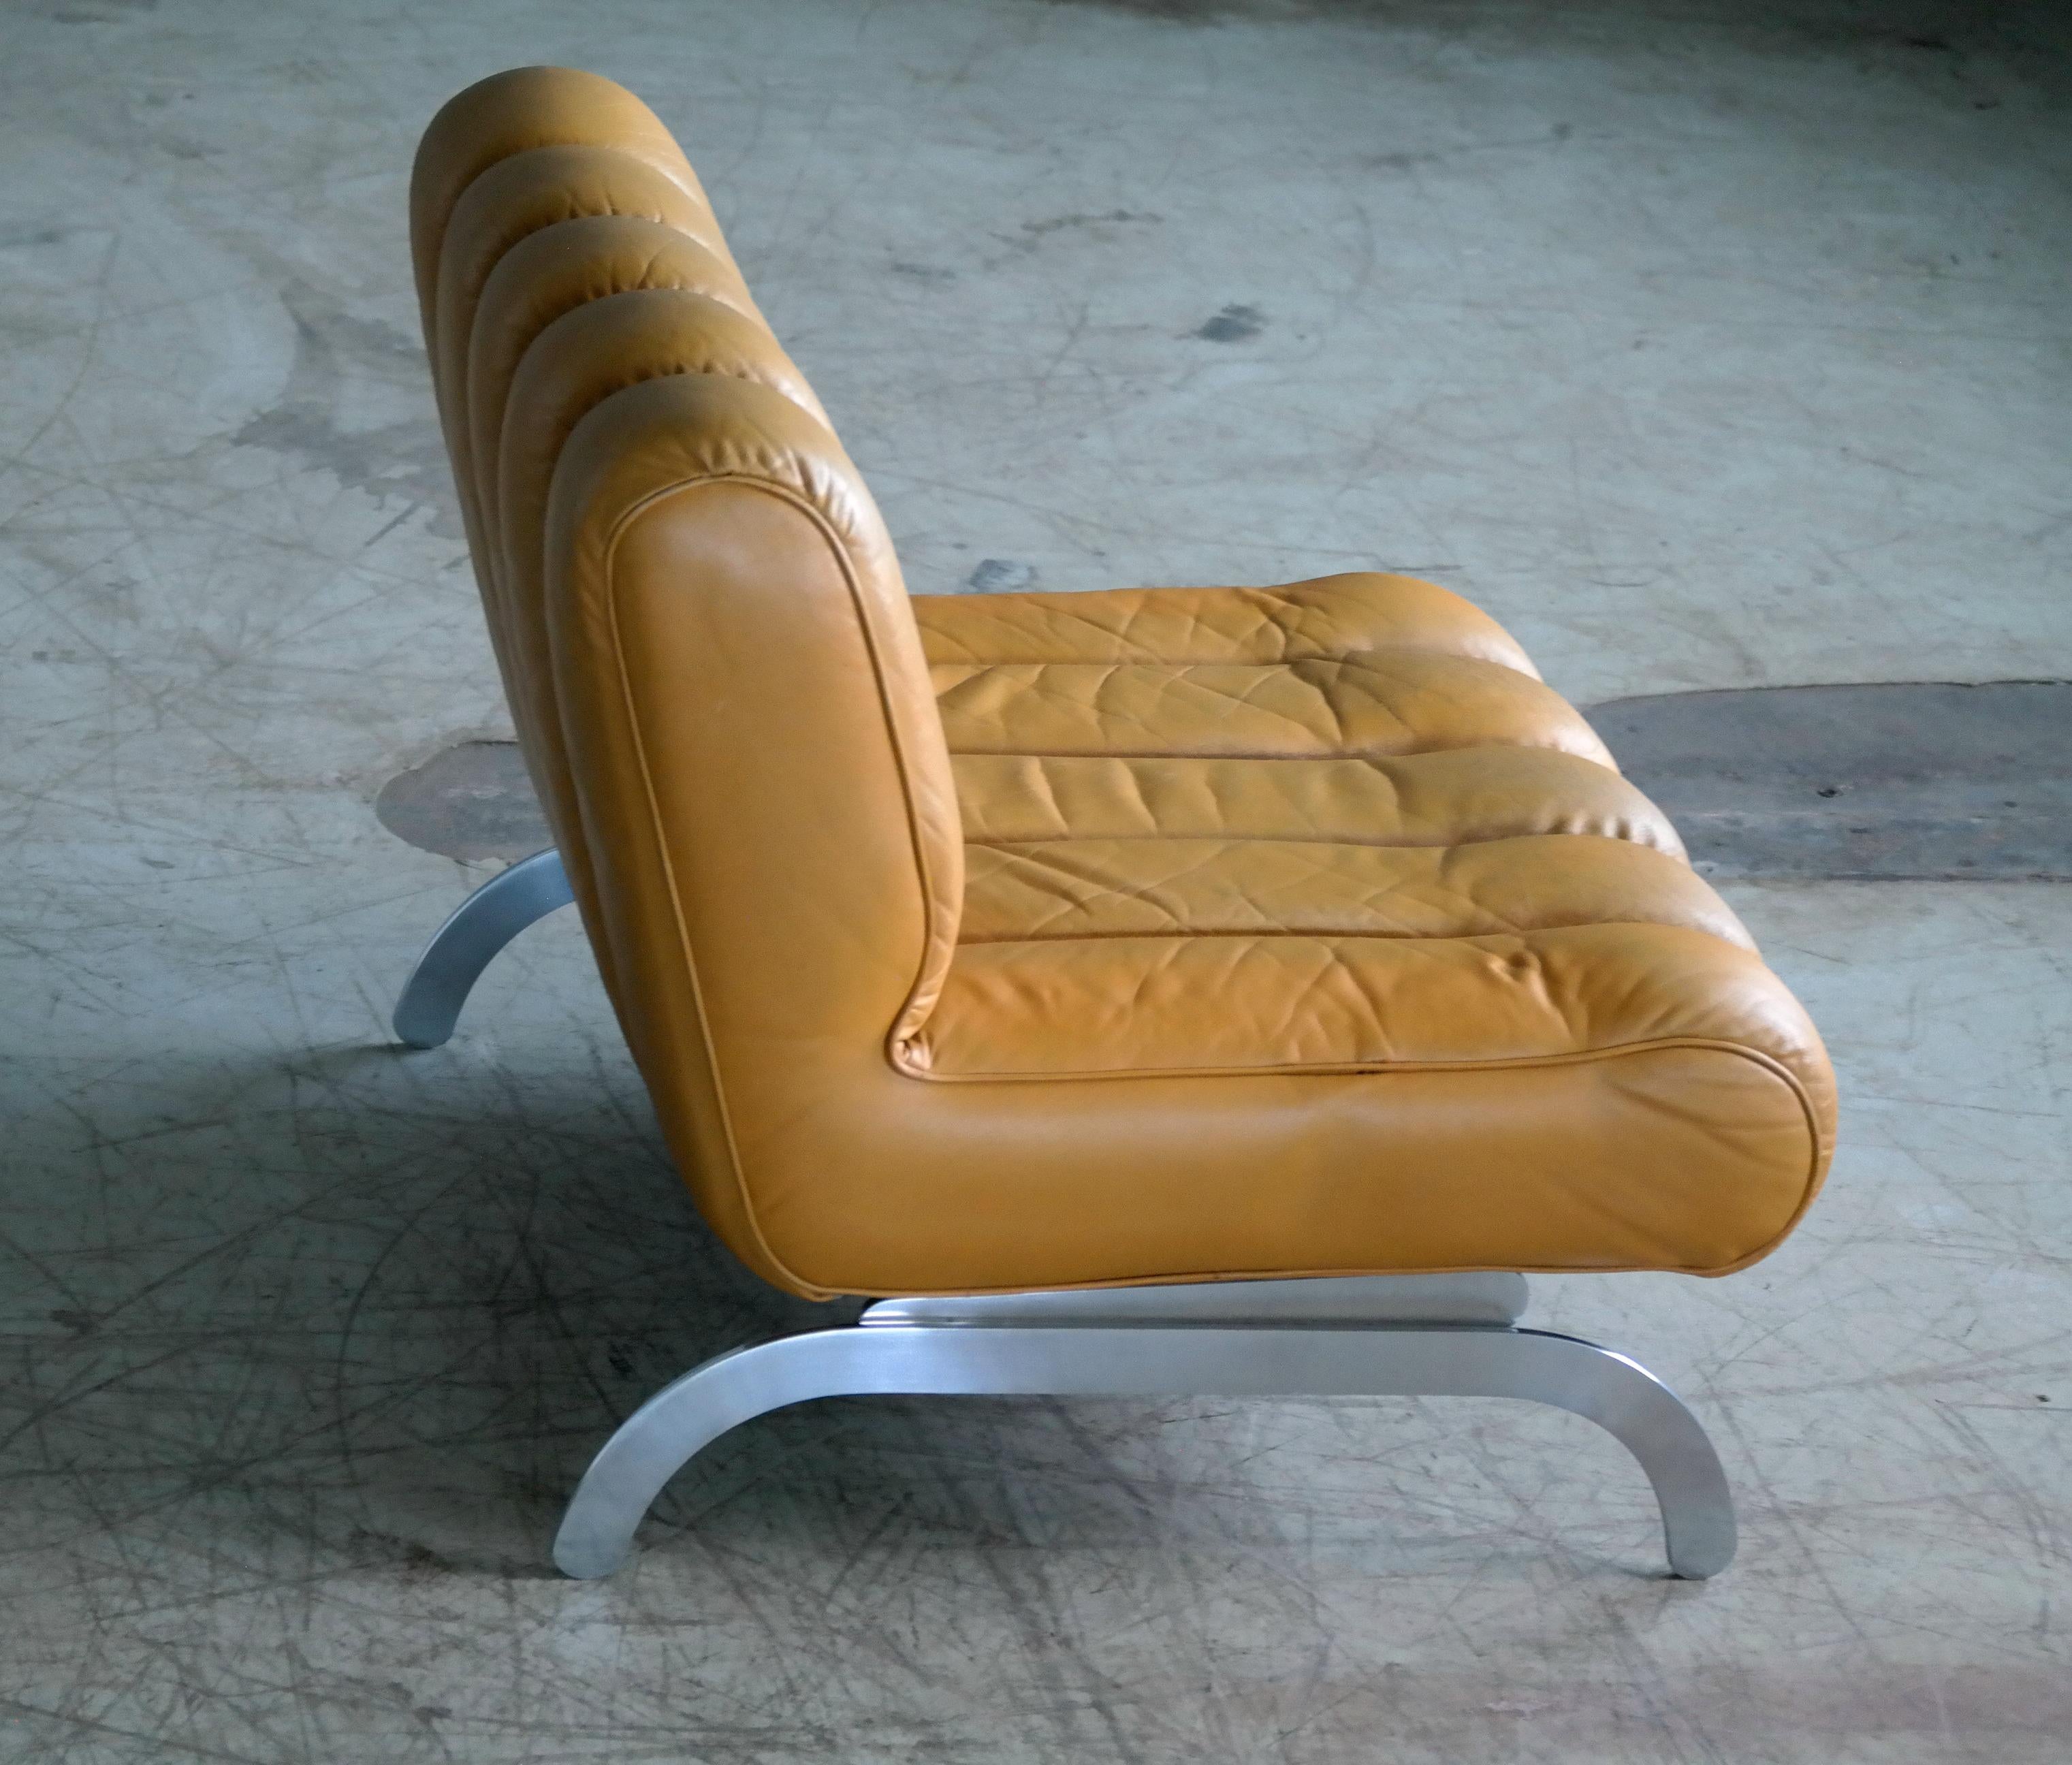 Midcentury Independence Lounge Chair in Mustard Yellow Leather by Karl Wittmann 1